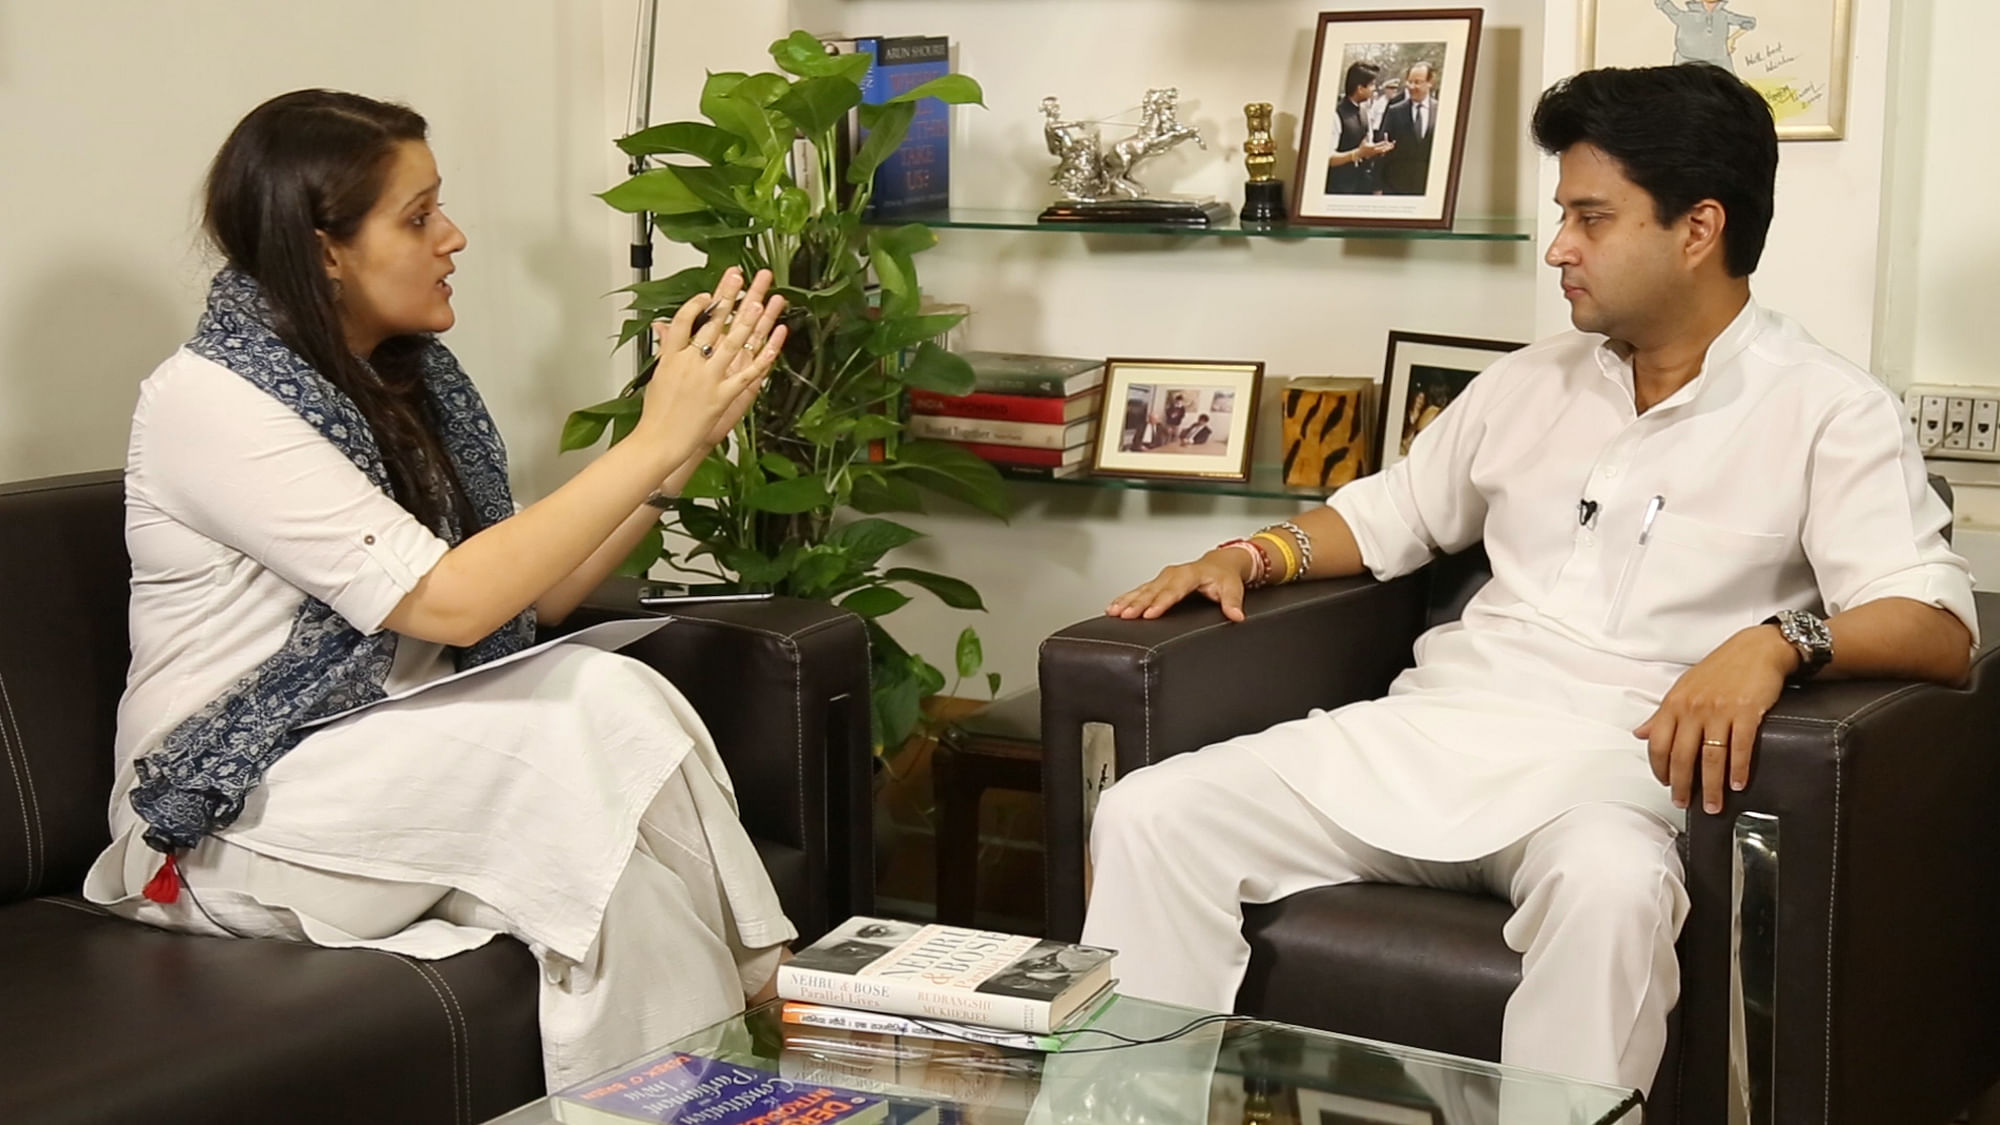 Jyotiraditya Scindia takes live questions from <b>The Quint</b>’s viewers. (Photo: The Quint)